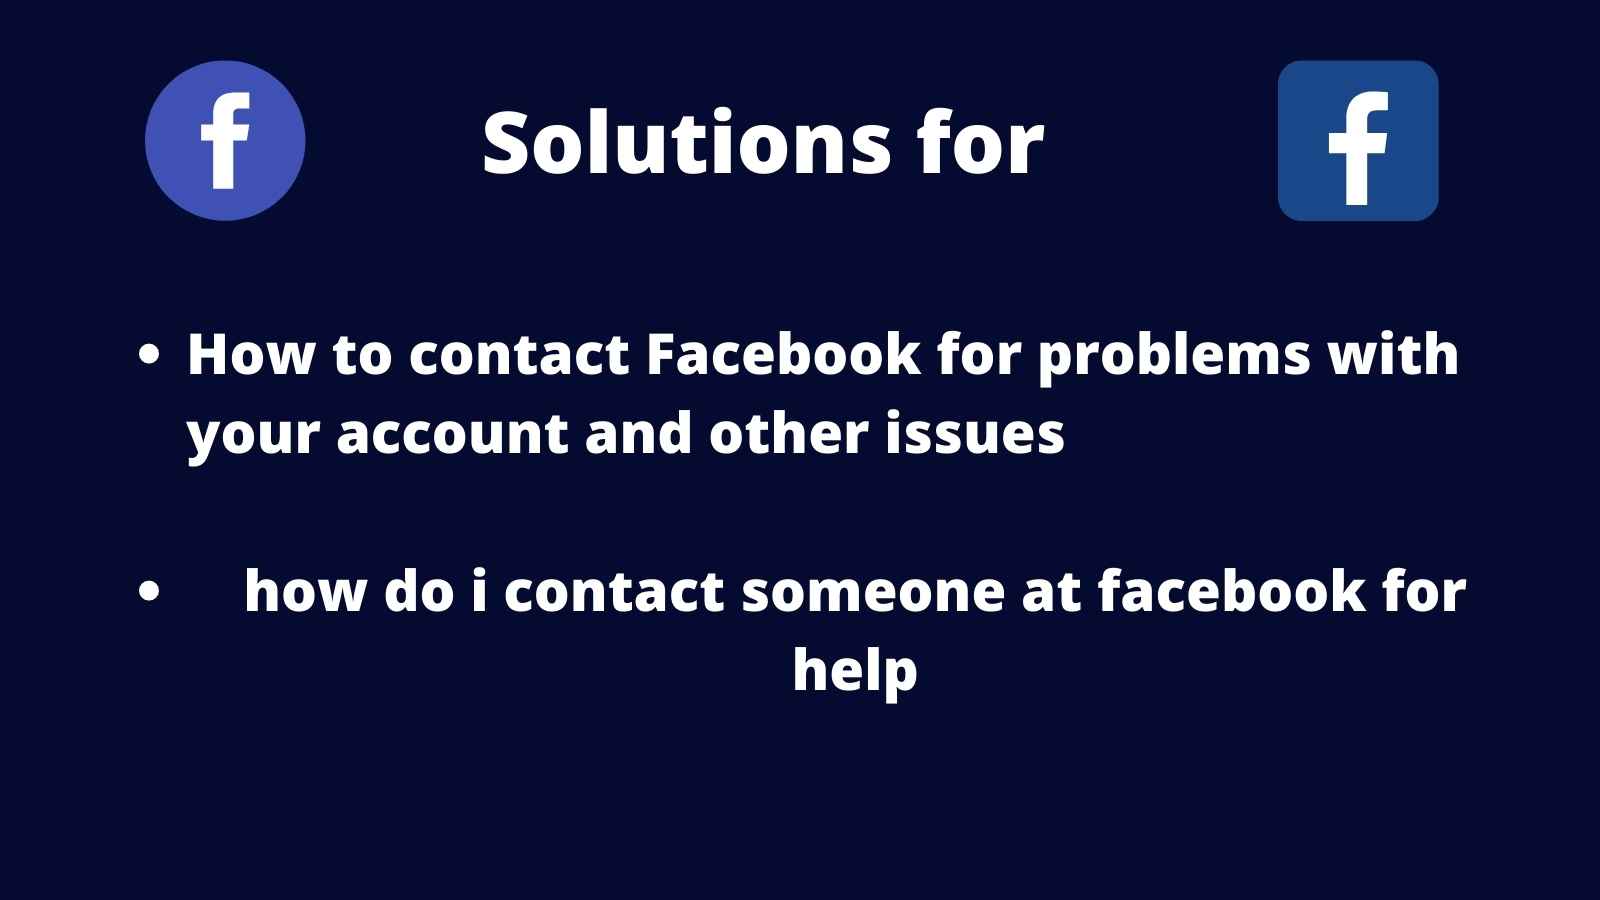 how to contact someone at facebook for help image